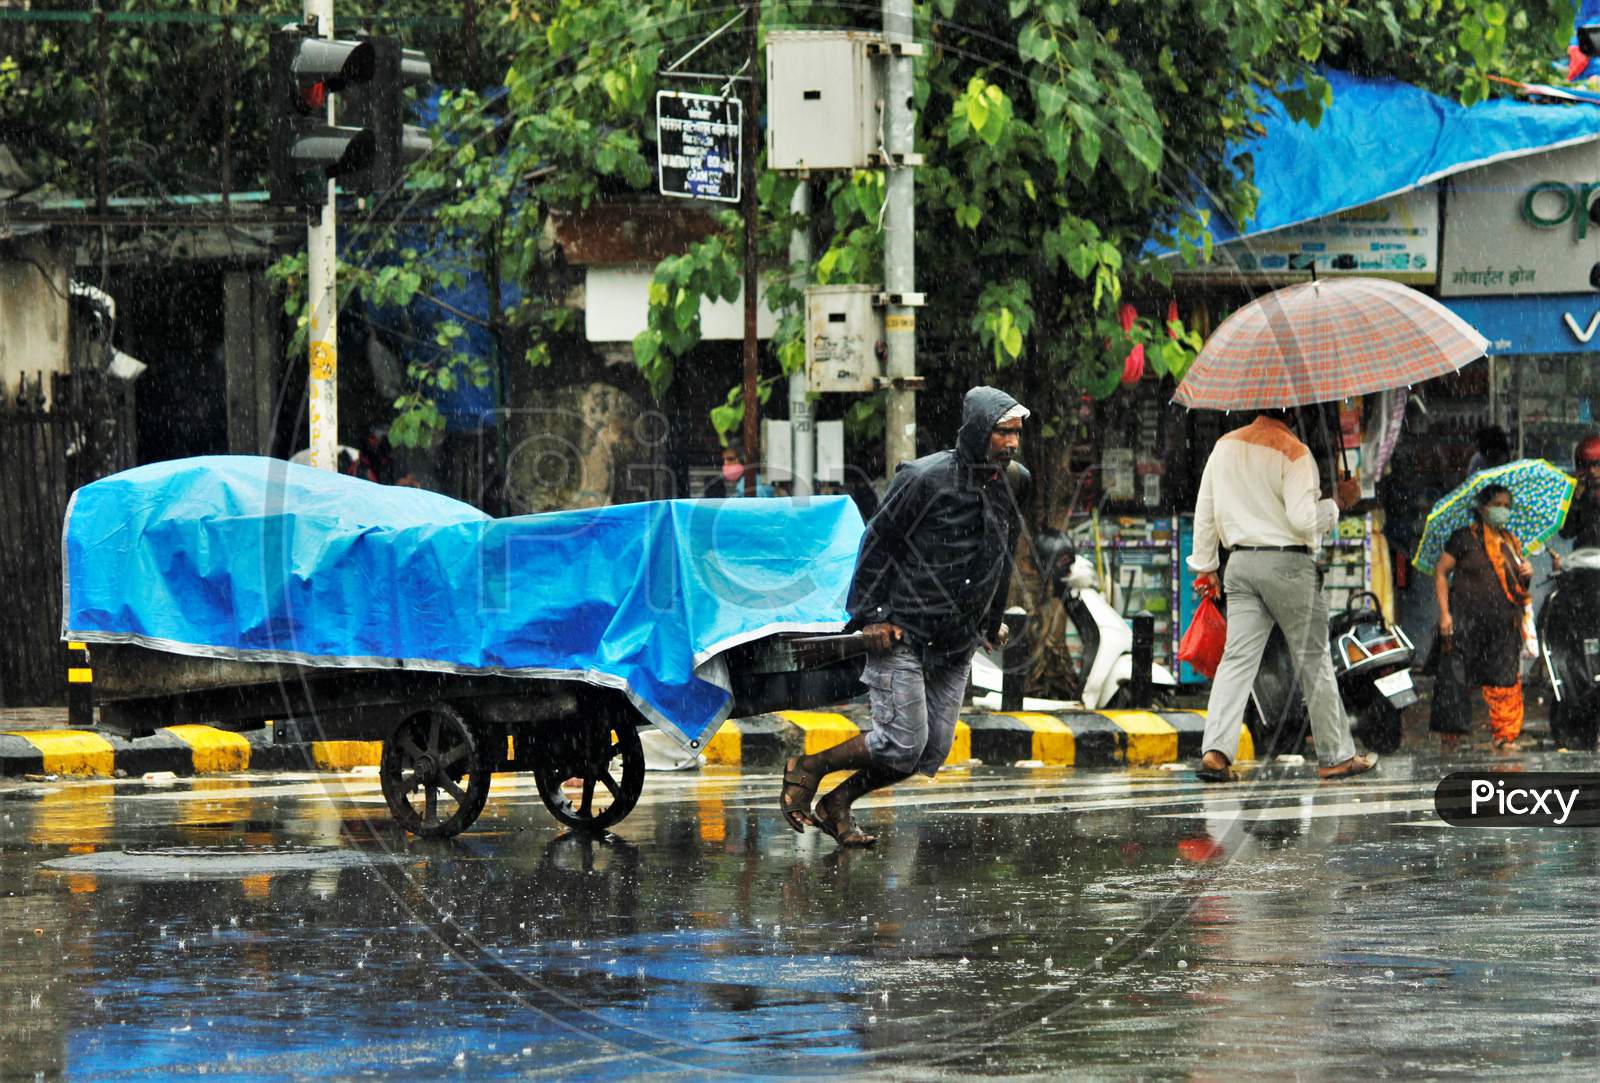 A man pulls a handcart during heavy rains, in Mumbai on July 4, 2020.